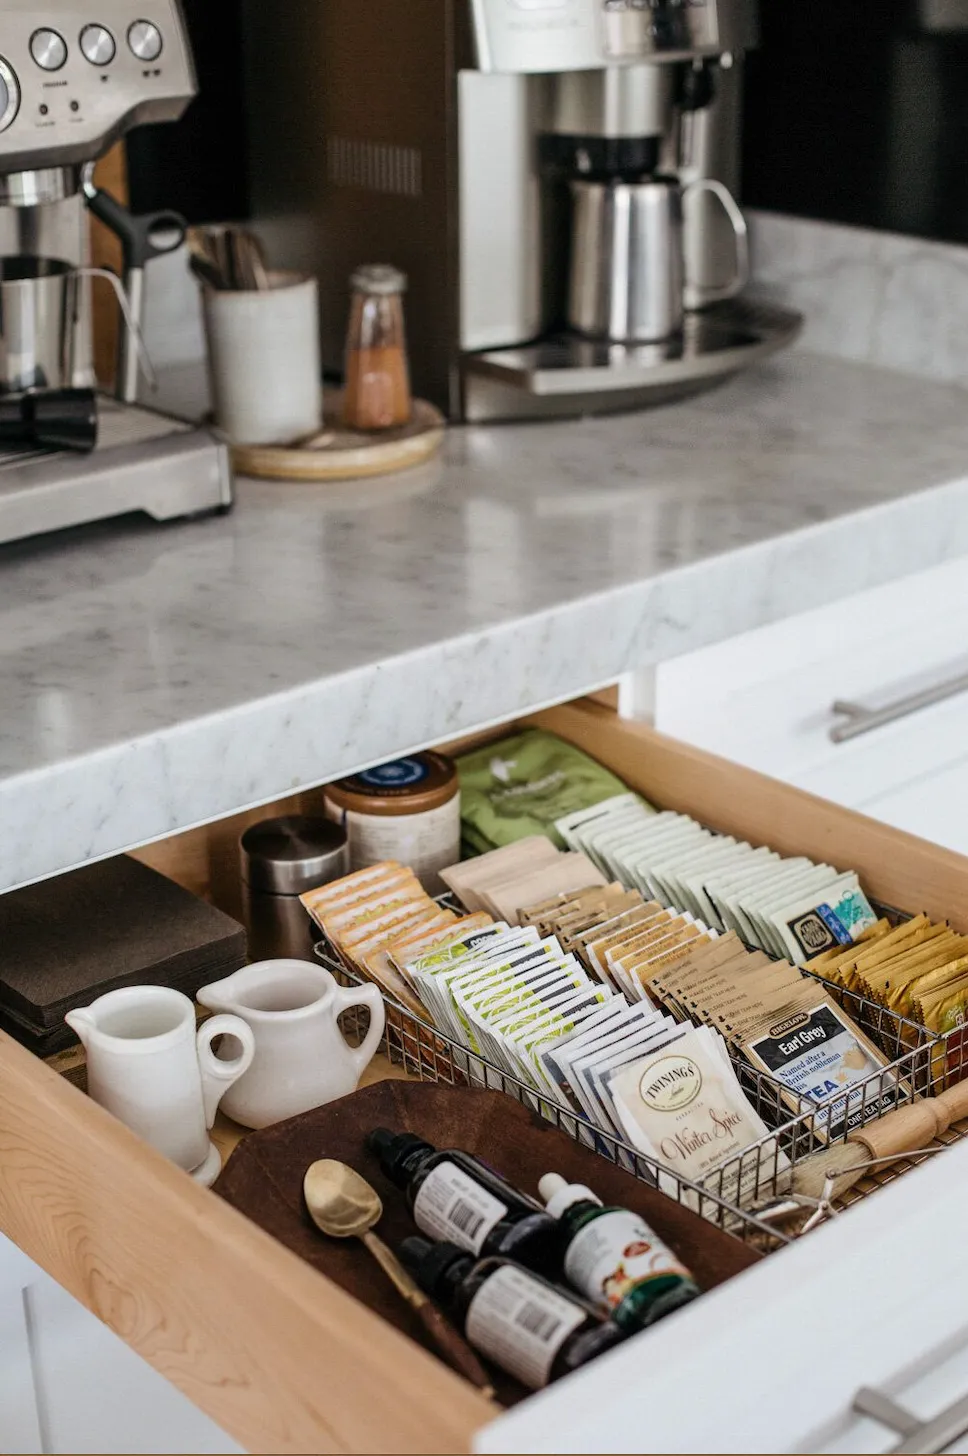 6 Coffee Station Ideas for an Organized, Caffeinated Kitchen